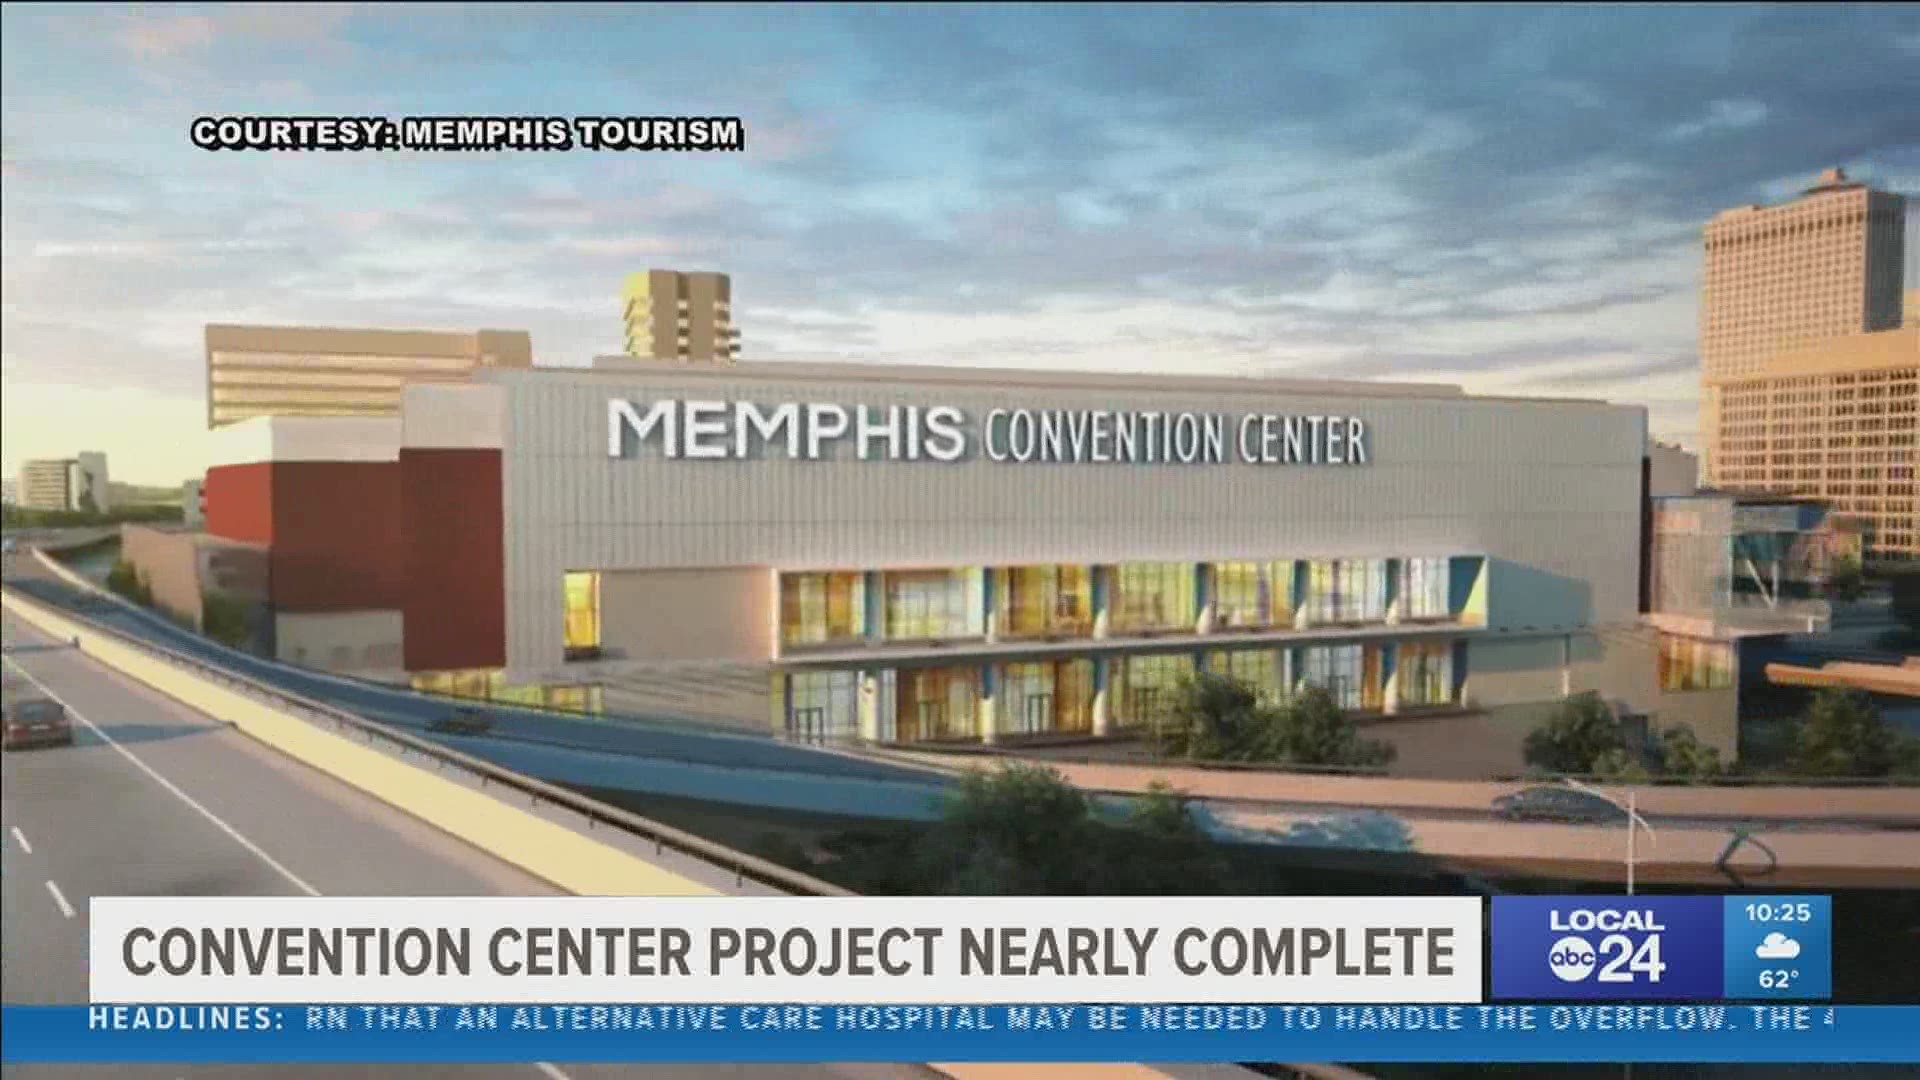 The convention center is almost ready but when can it be used